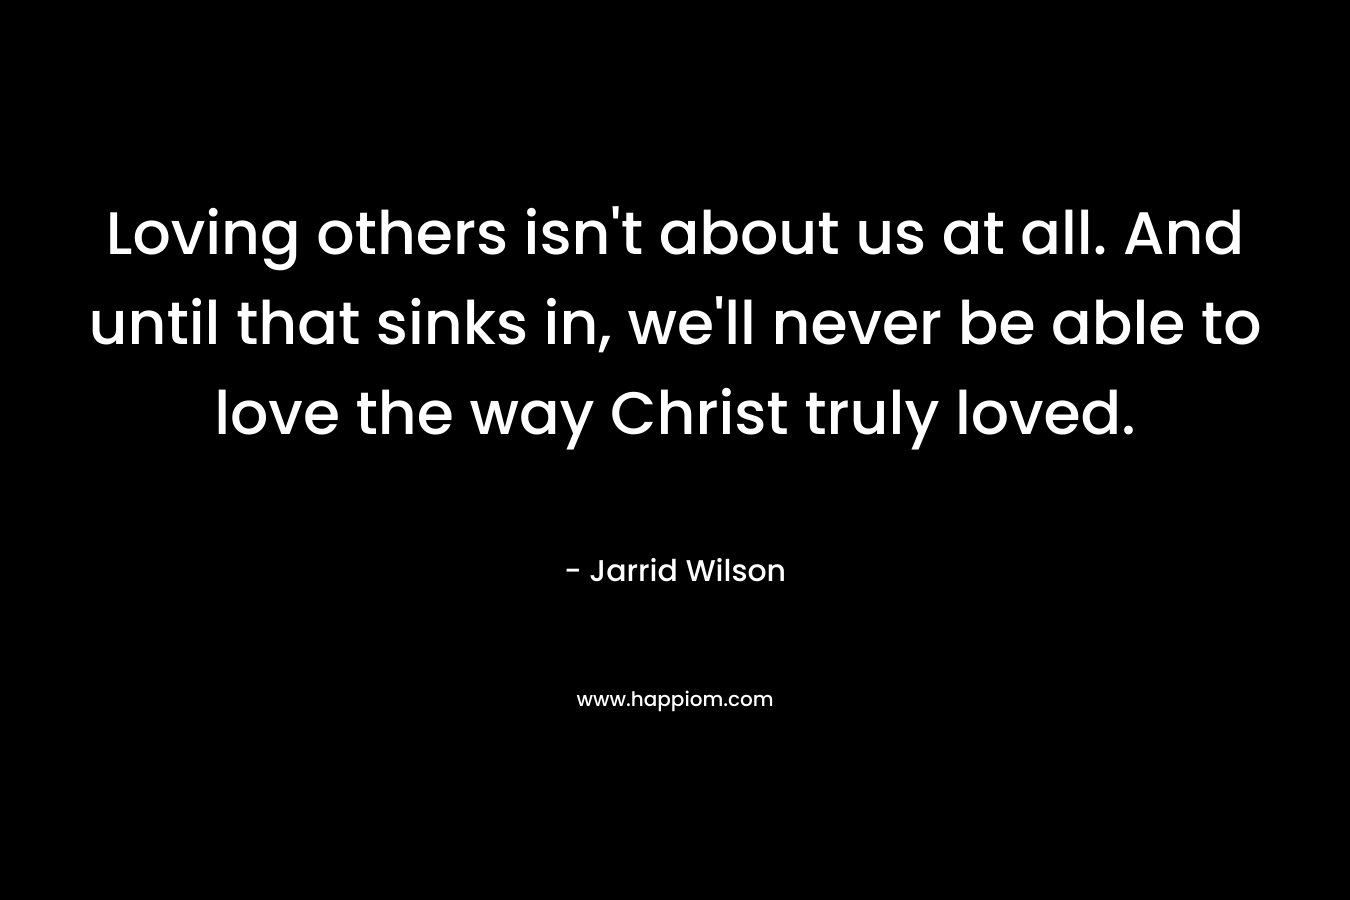 Loving others isn’t about us at all. And until that sinks in, we’ll never be able to love the way Christ truly loved. – Jarrid Wilson